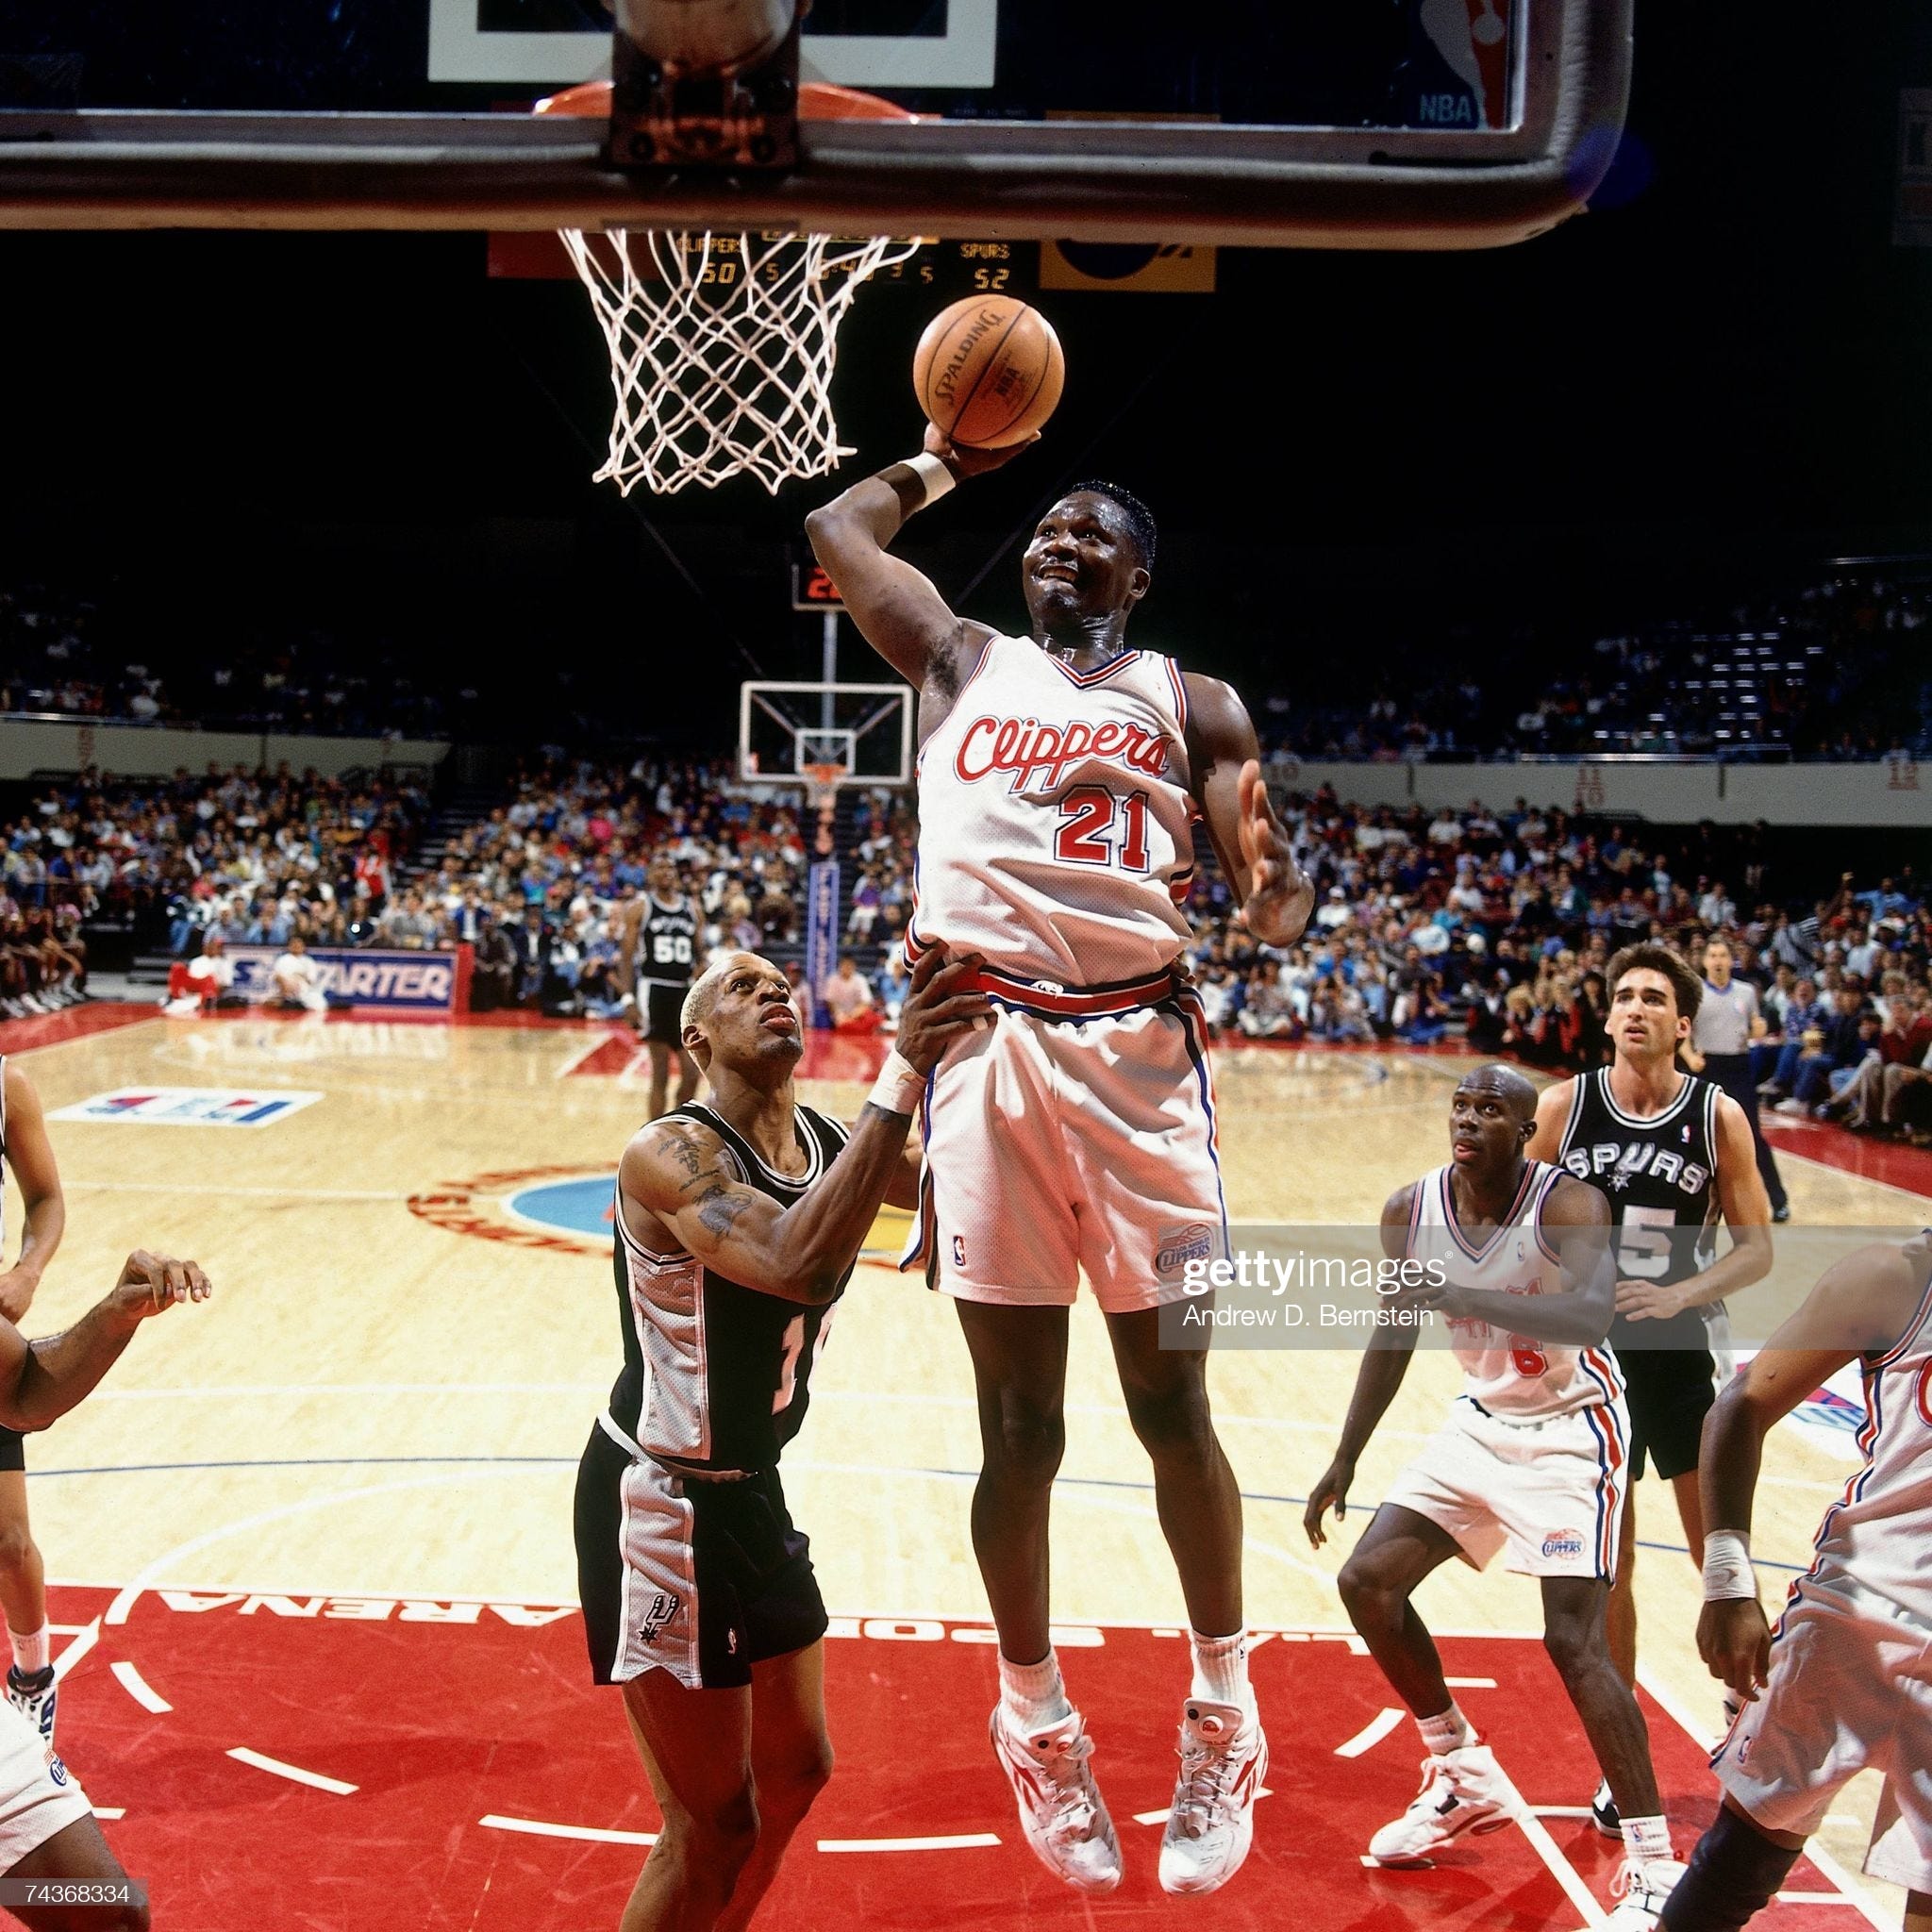 dominique wilkins clippers